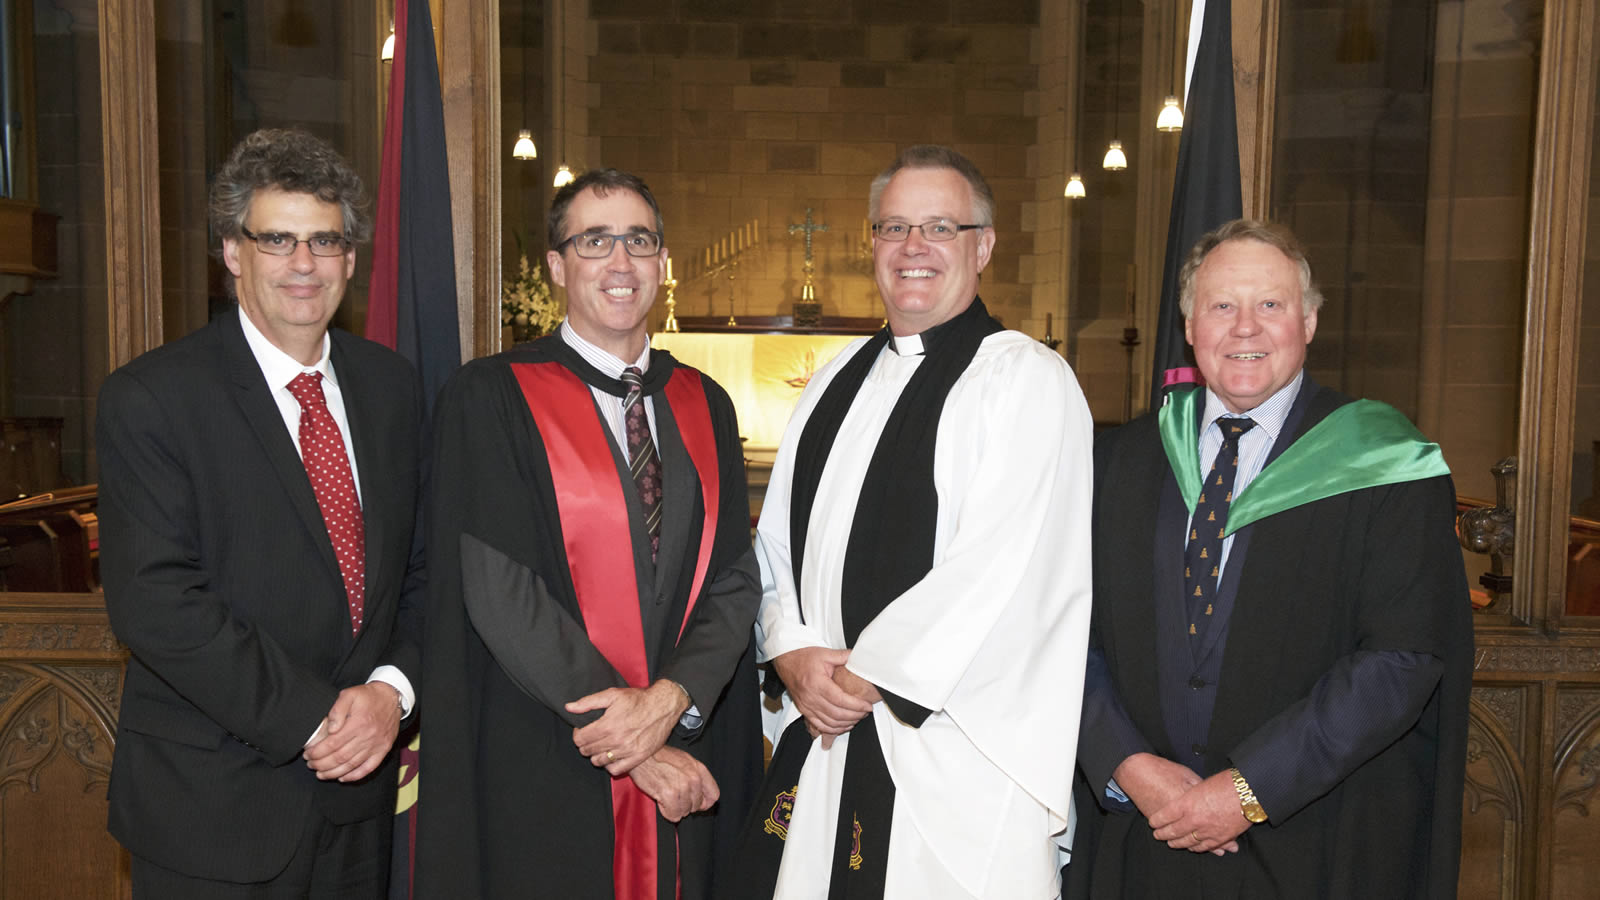 Professor Marcus Haward, Dr Adam Forsyth, The Reverend Dr Lee Weissel and Mr Warwick Dean. (large)